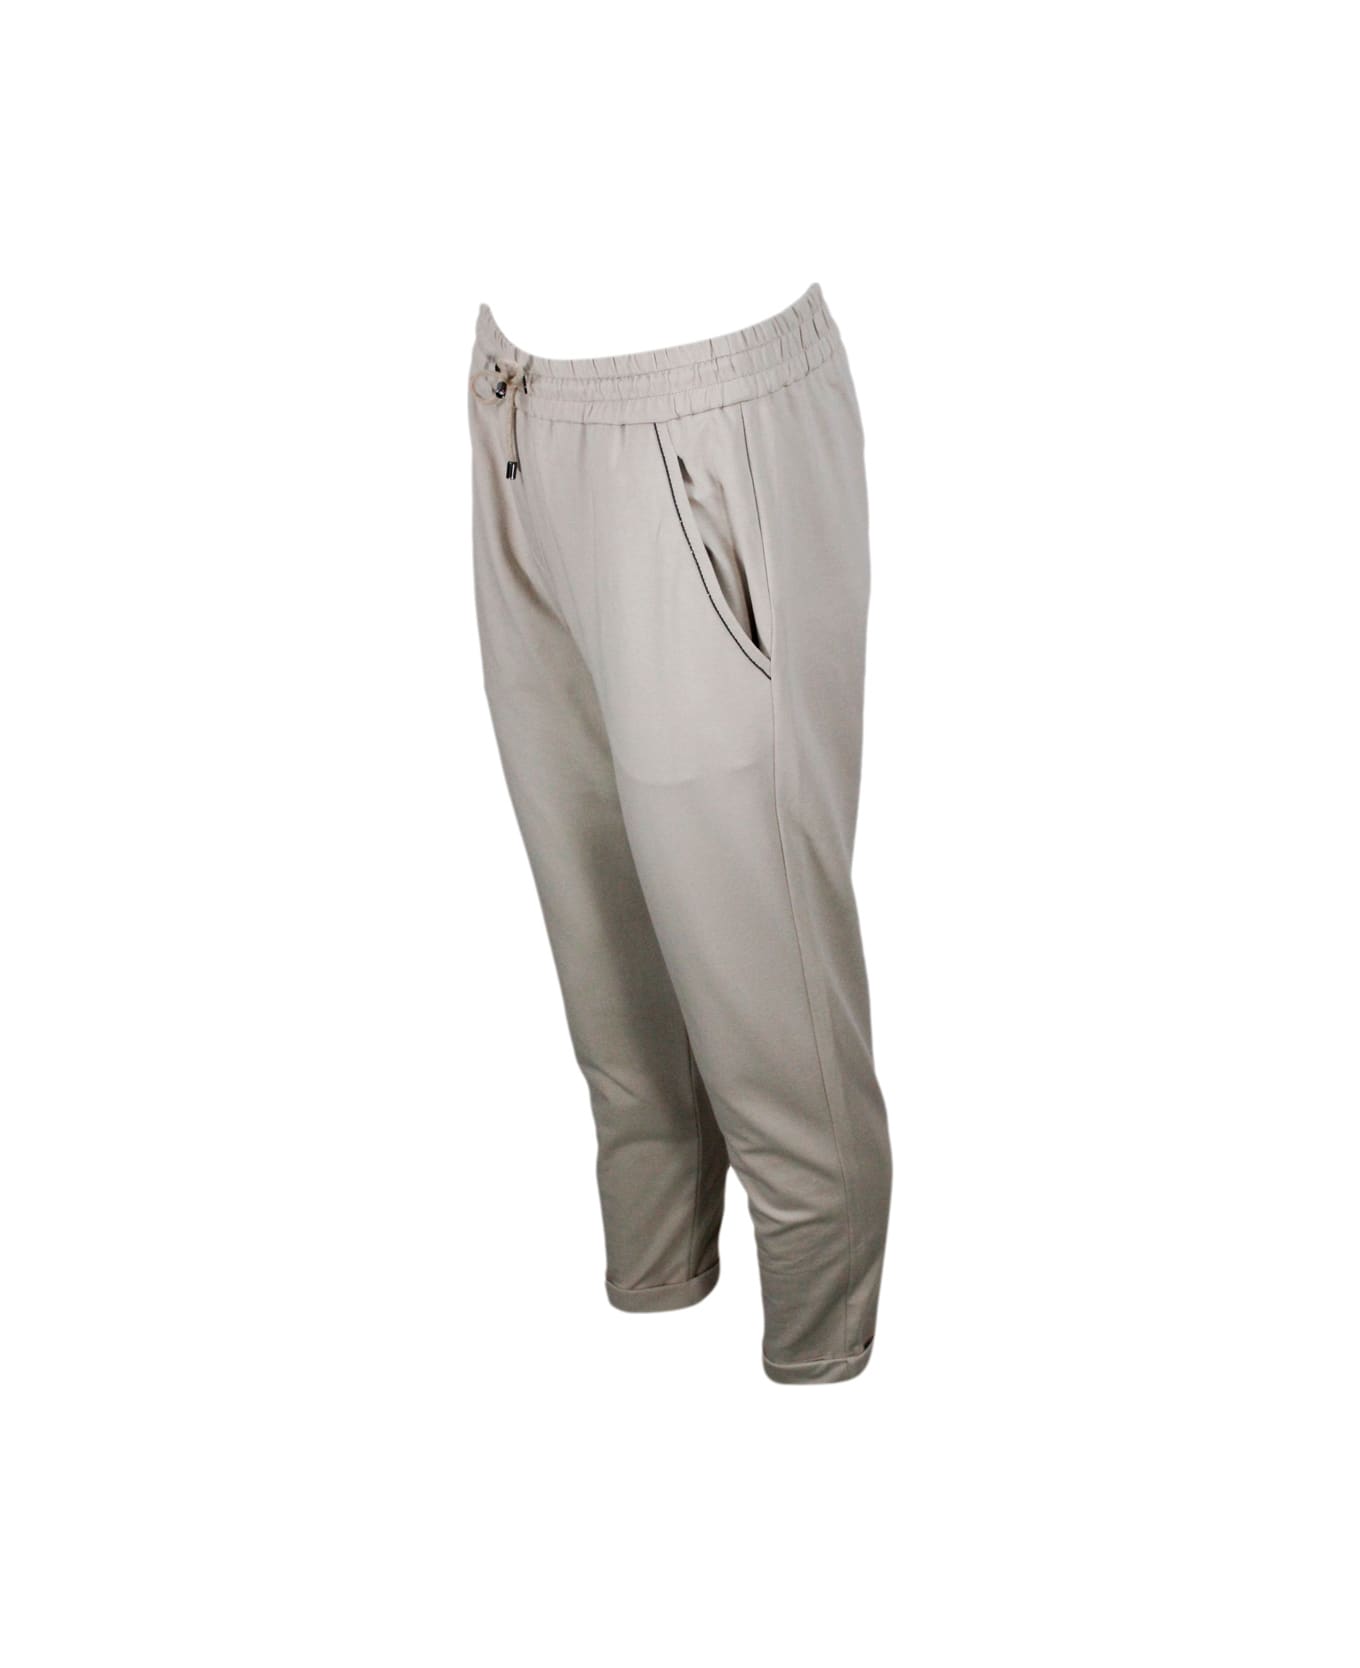 Brunello Cucinelli Jogging Trousers With Drawstring Waist In Stretch Cotton With Welt Pockets Embellished With Jewels - Beige